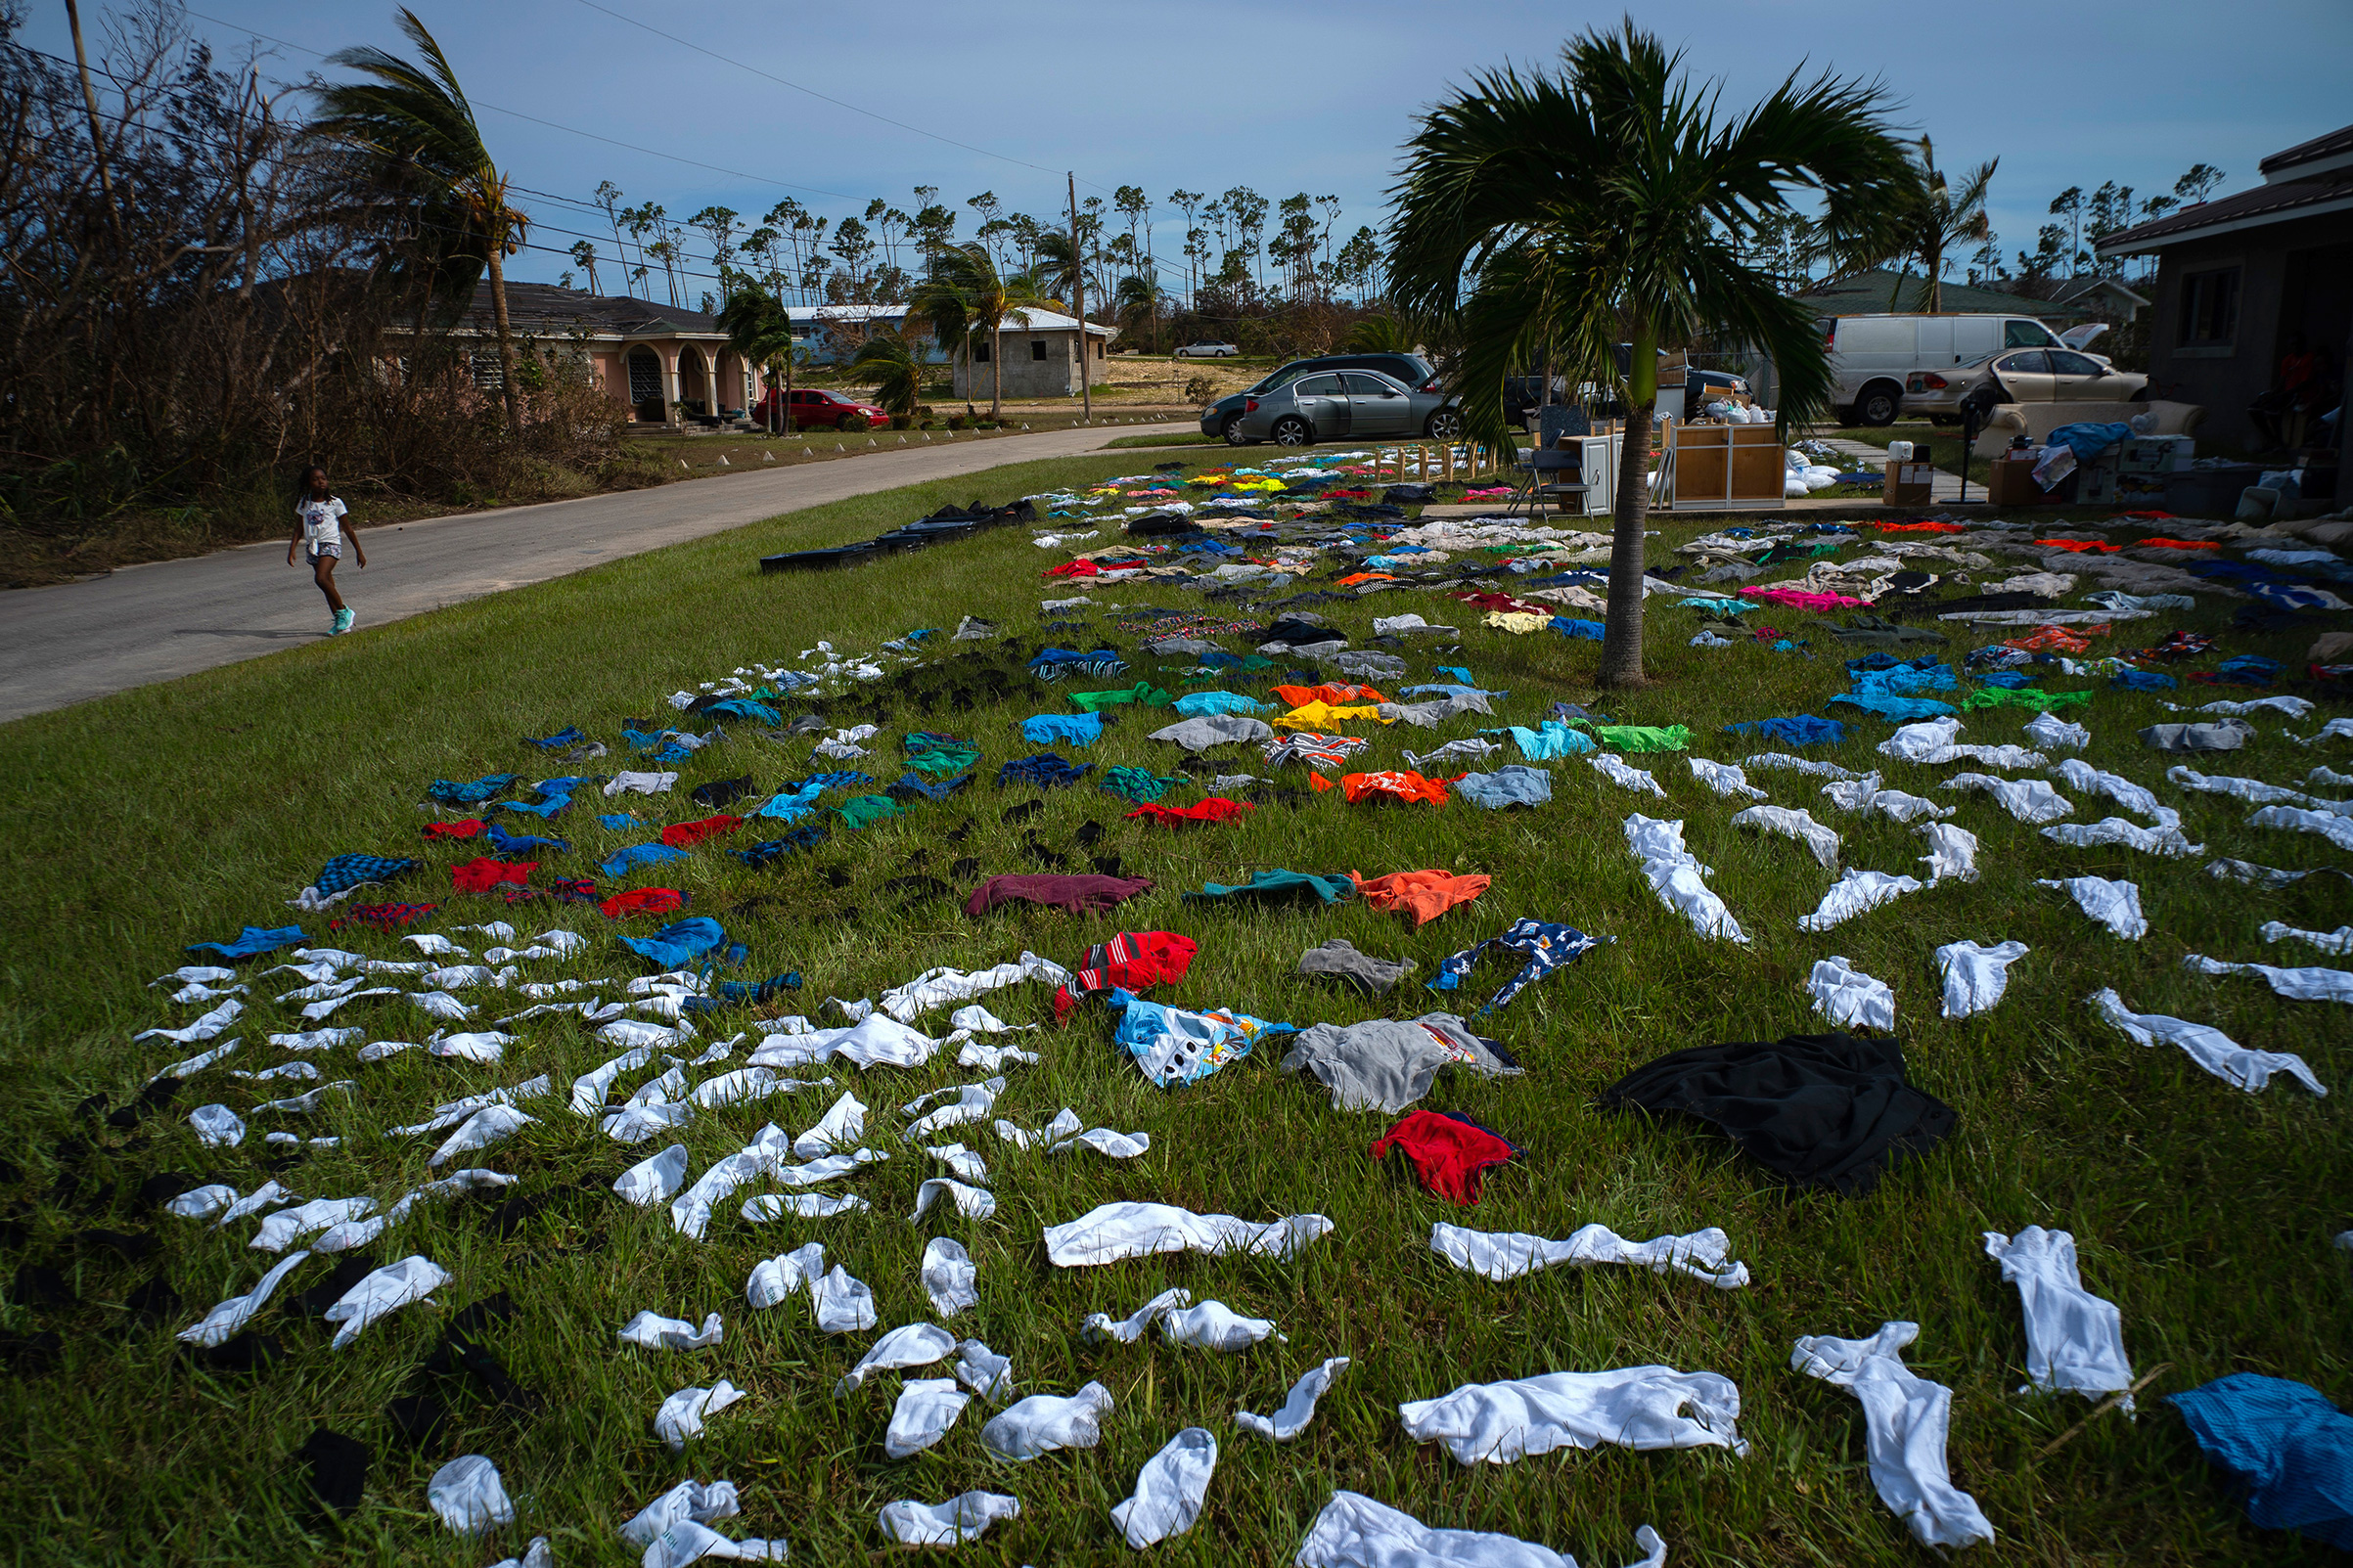 A child walks past clothes laid out to dry on a field in the aftermath of Hurricane Dorian in the Arden Forest neighborhood of Freeport, Bahamas, Sept. 4, 2019. (Ramon Espinosa—AP)